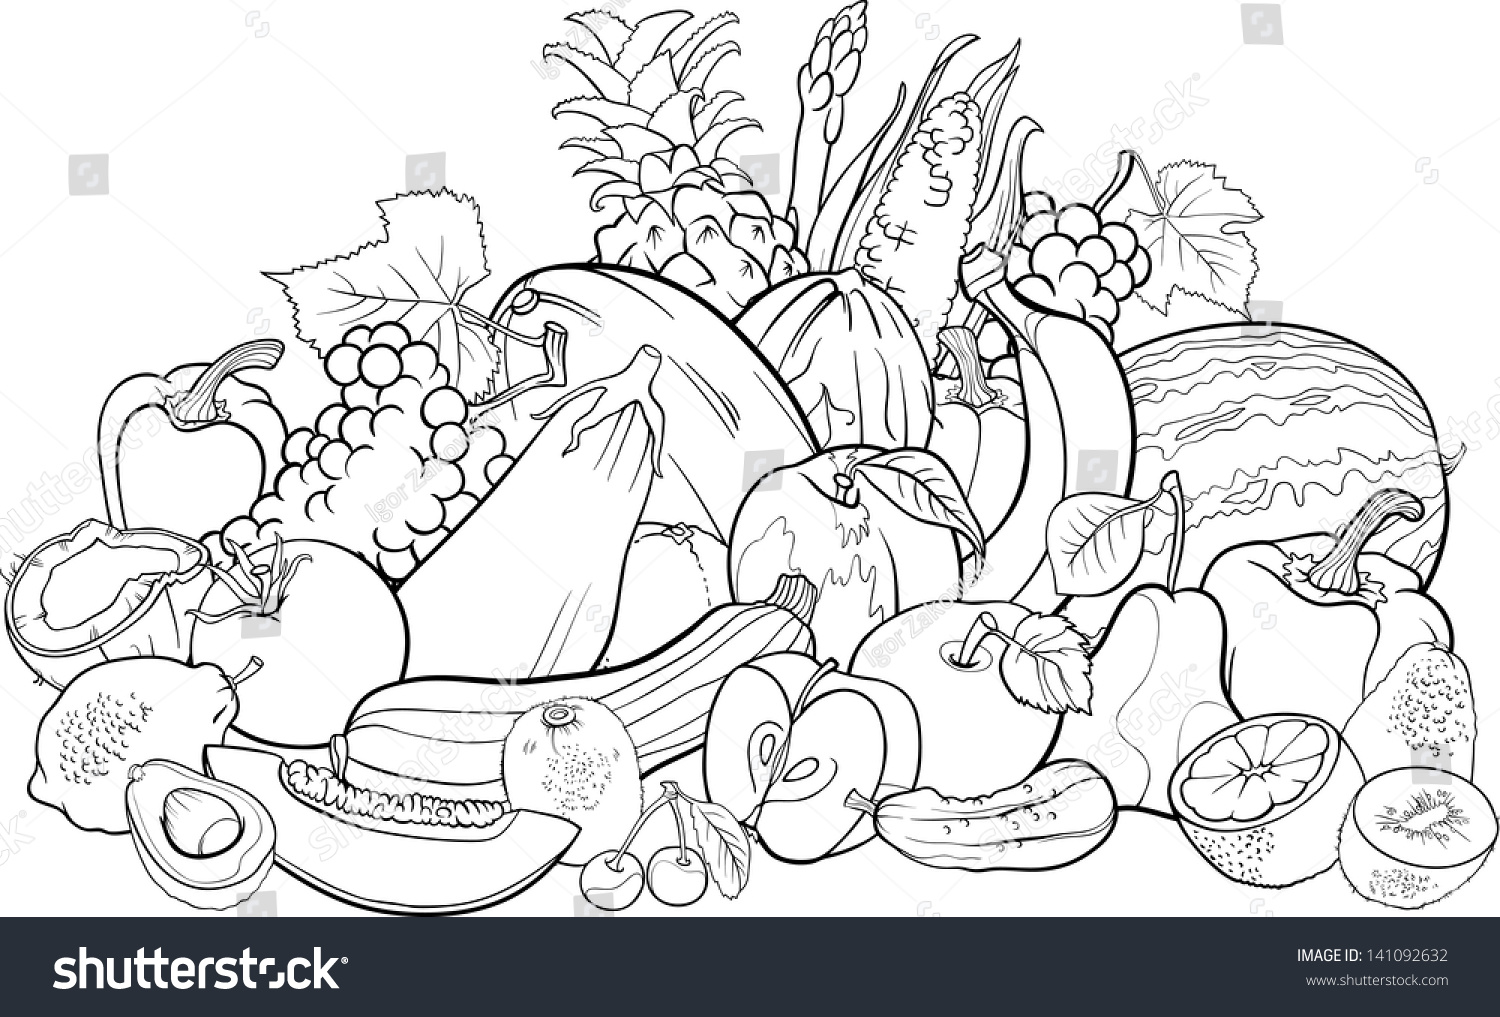 clipart fruit and vegetables black and white - photo #43